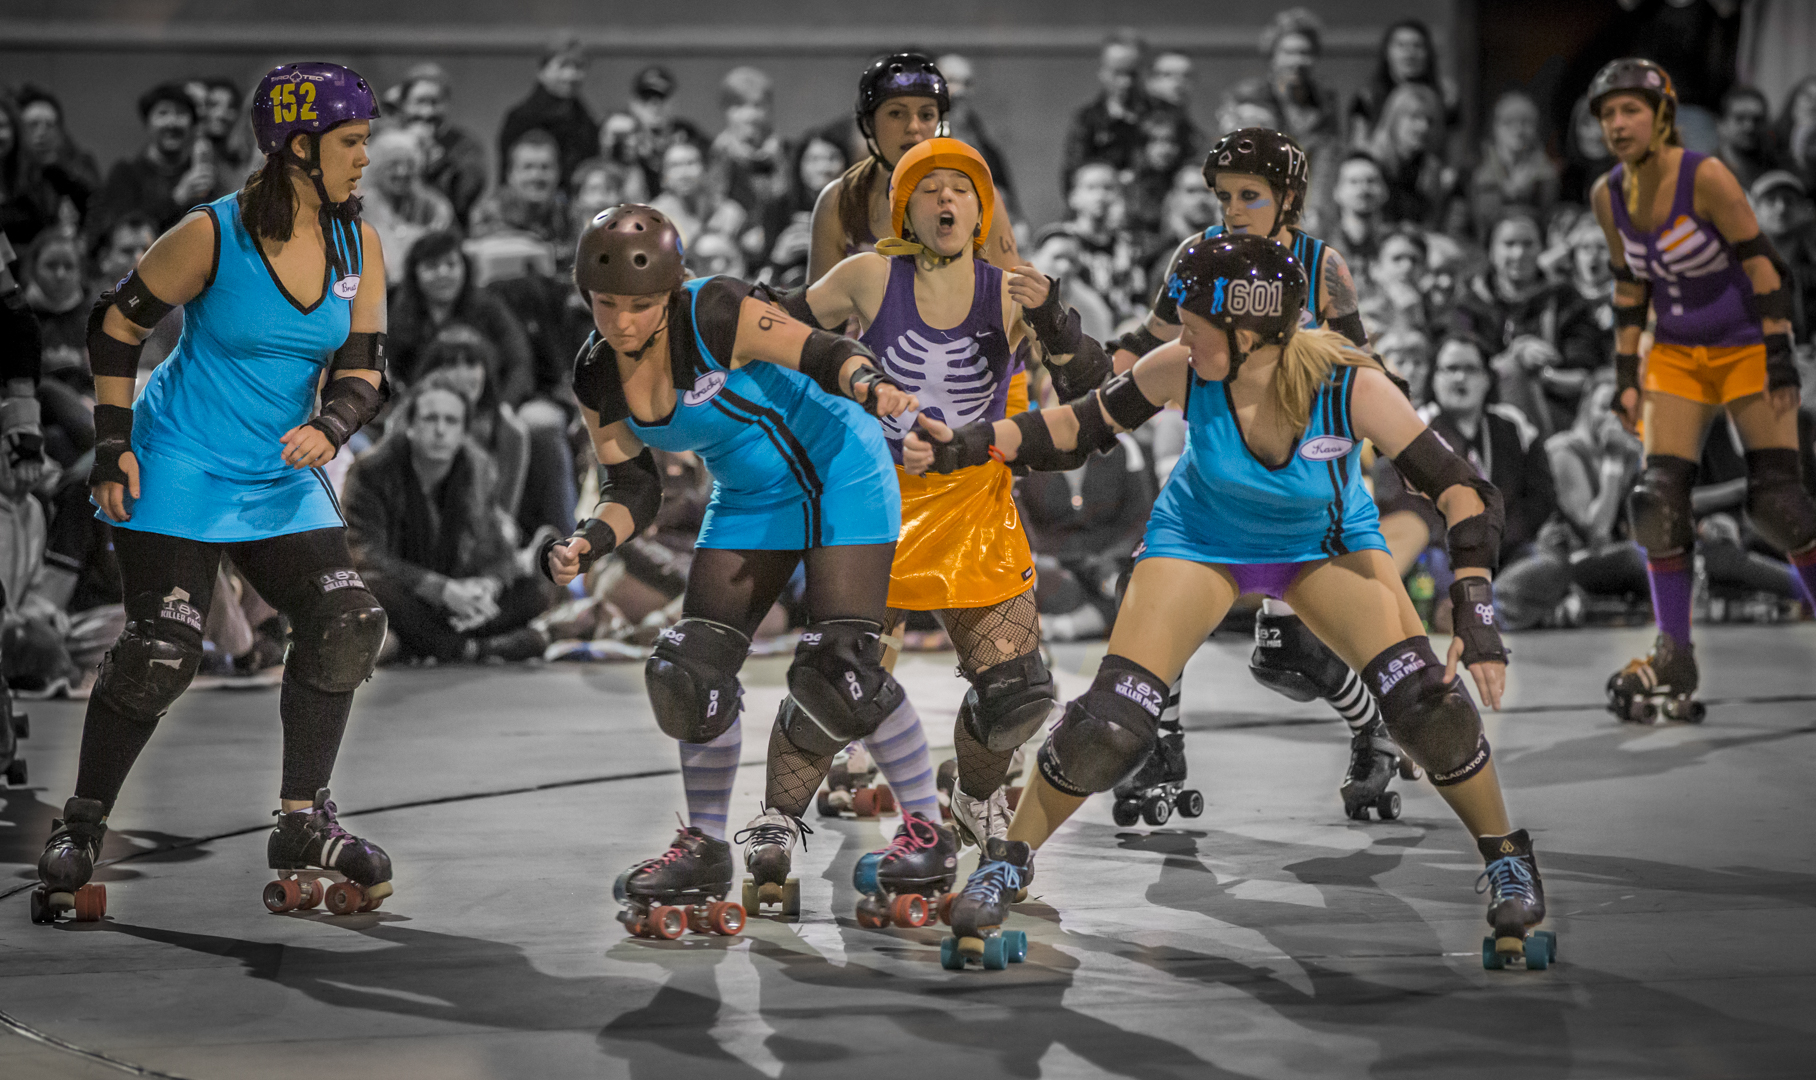 Woods Chris Roller Derby Action 9 May 2021   Sports Photography